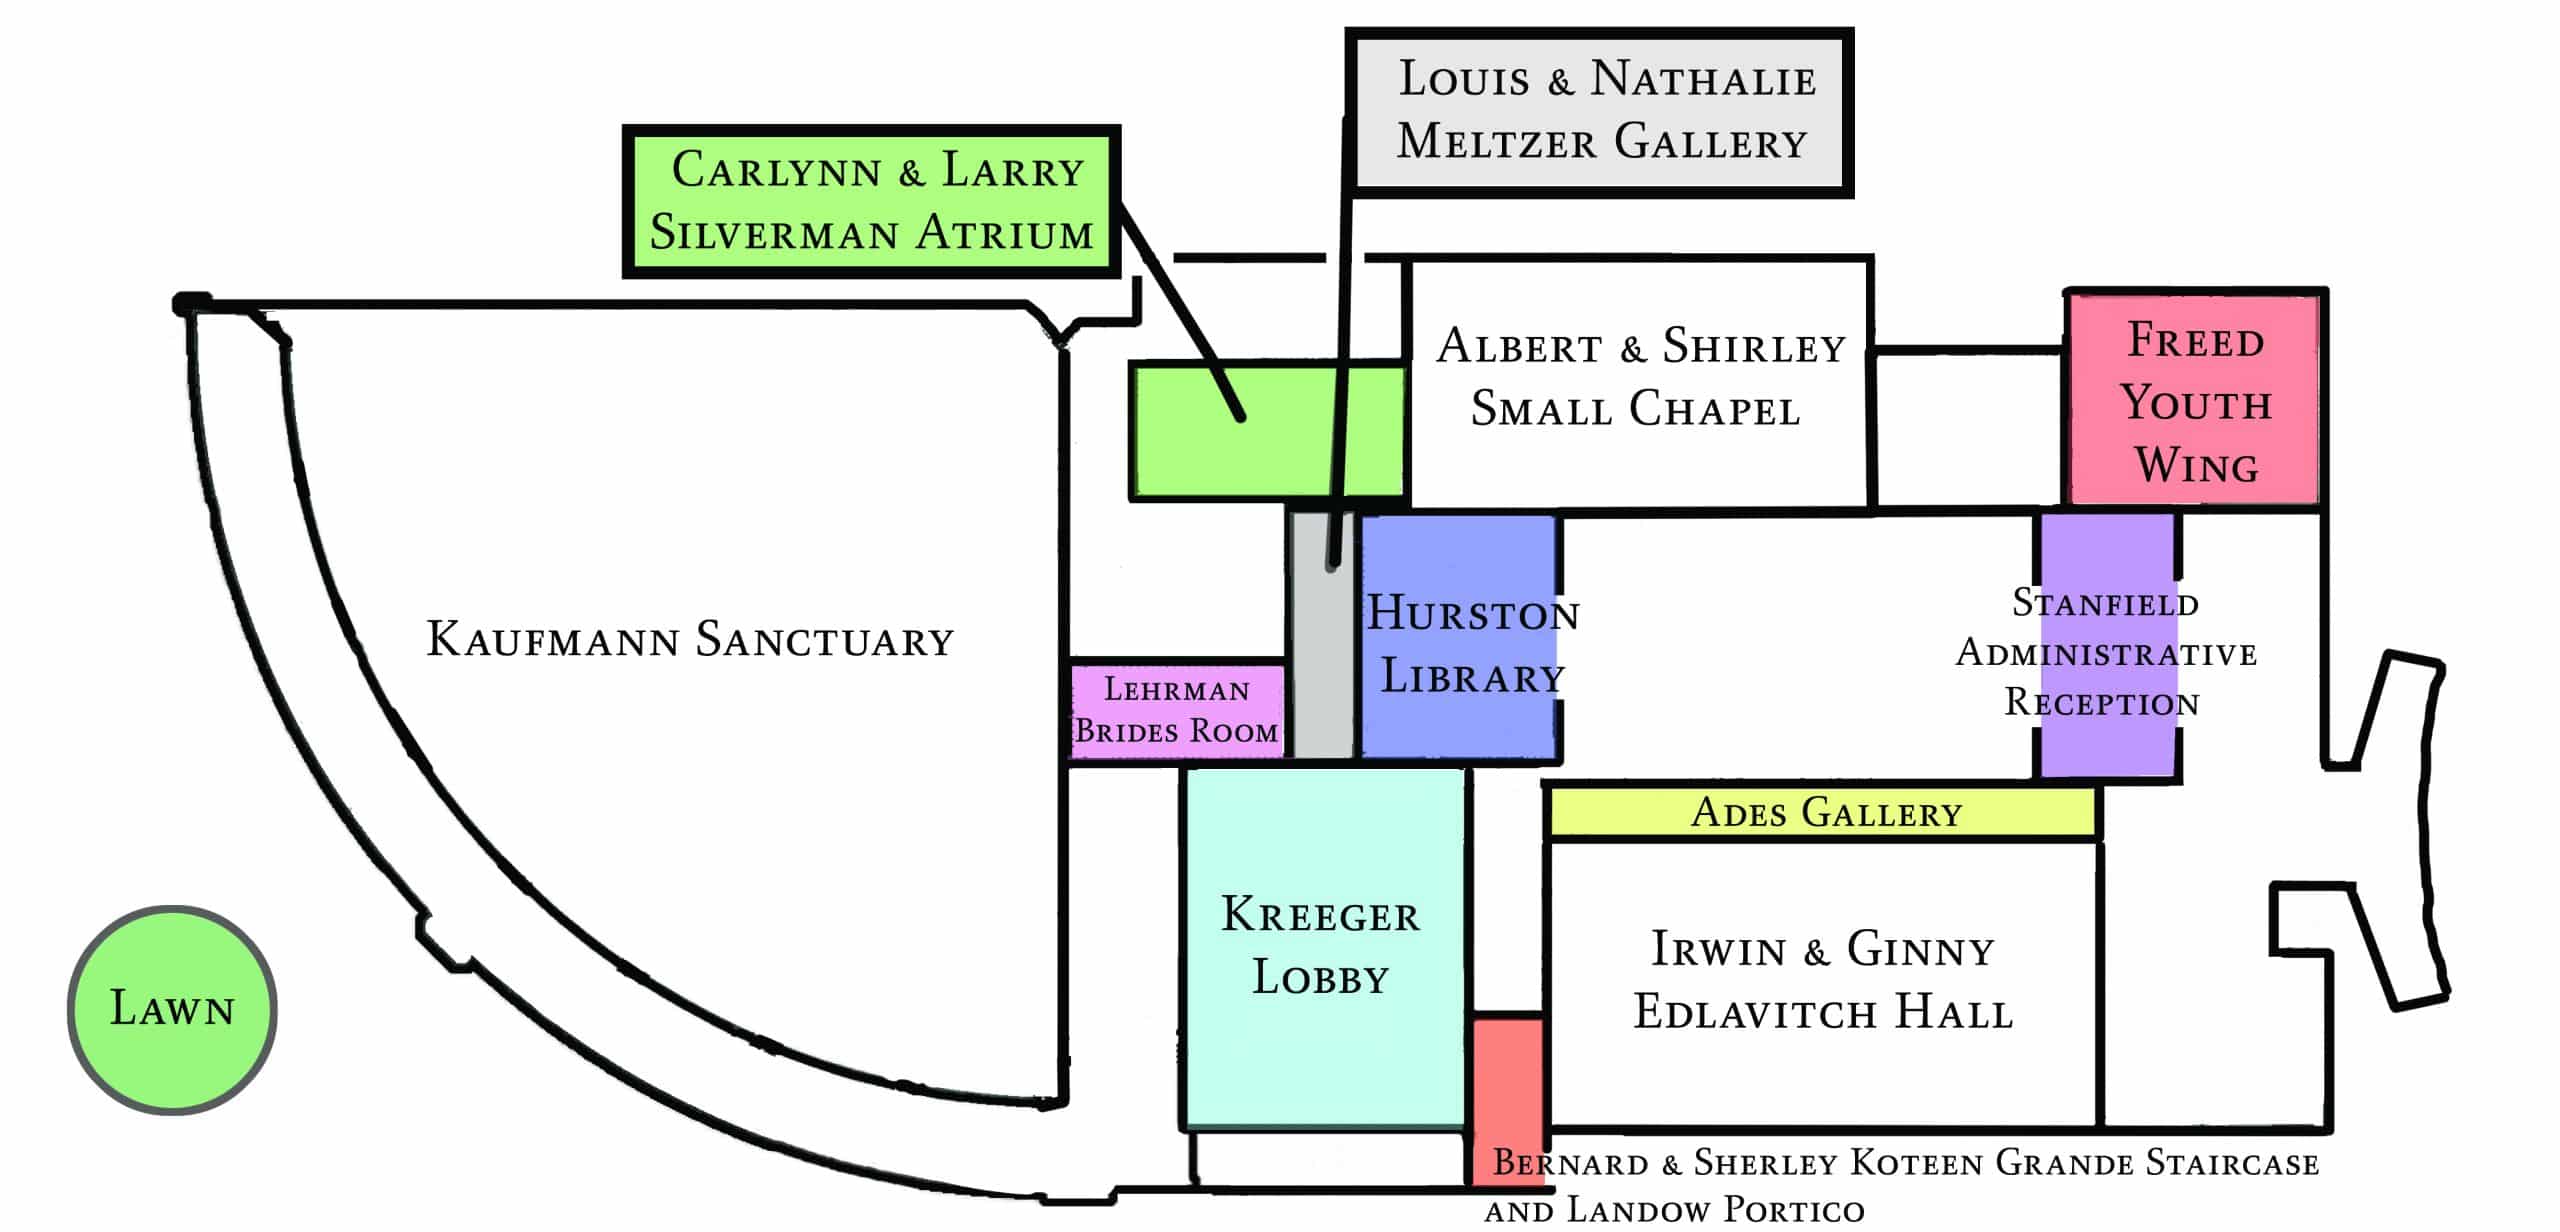 Map of WHC Temple with galleries indicated